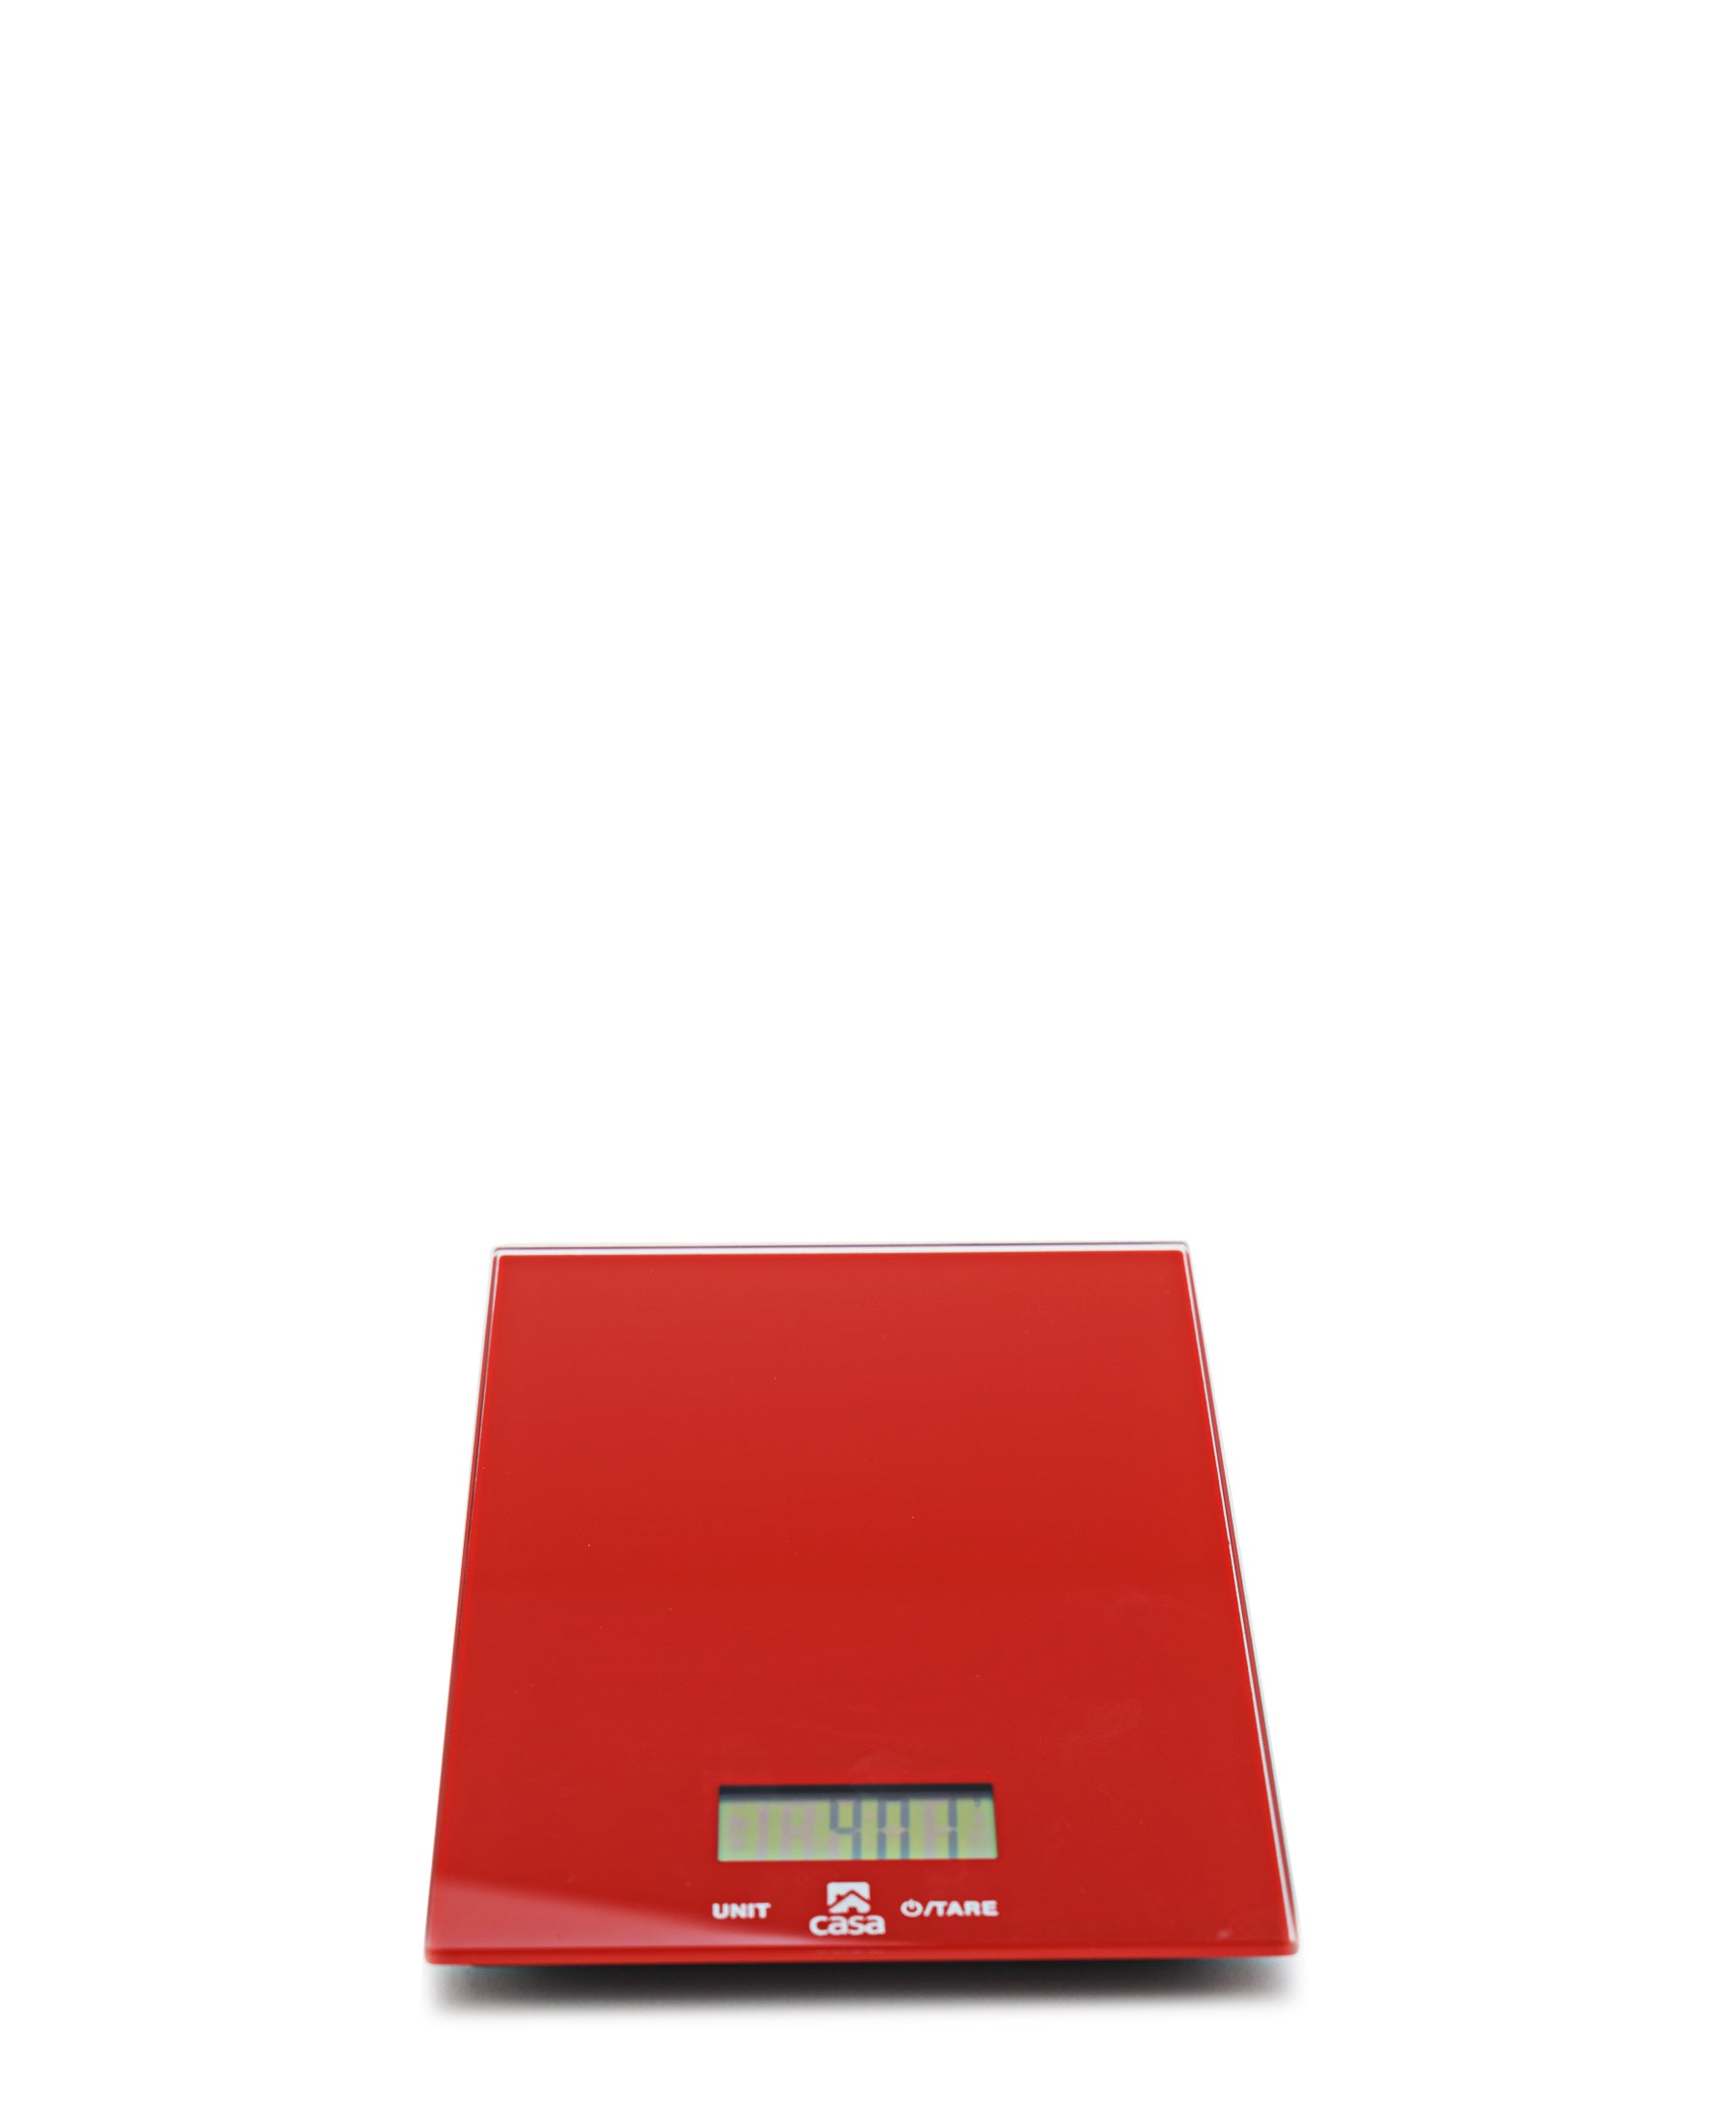 Casa Kitchen Scale LCD Screen - Red